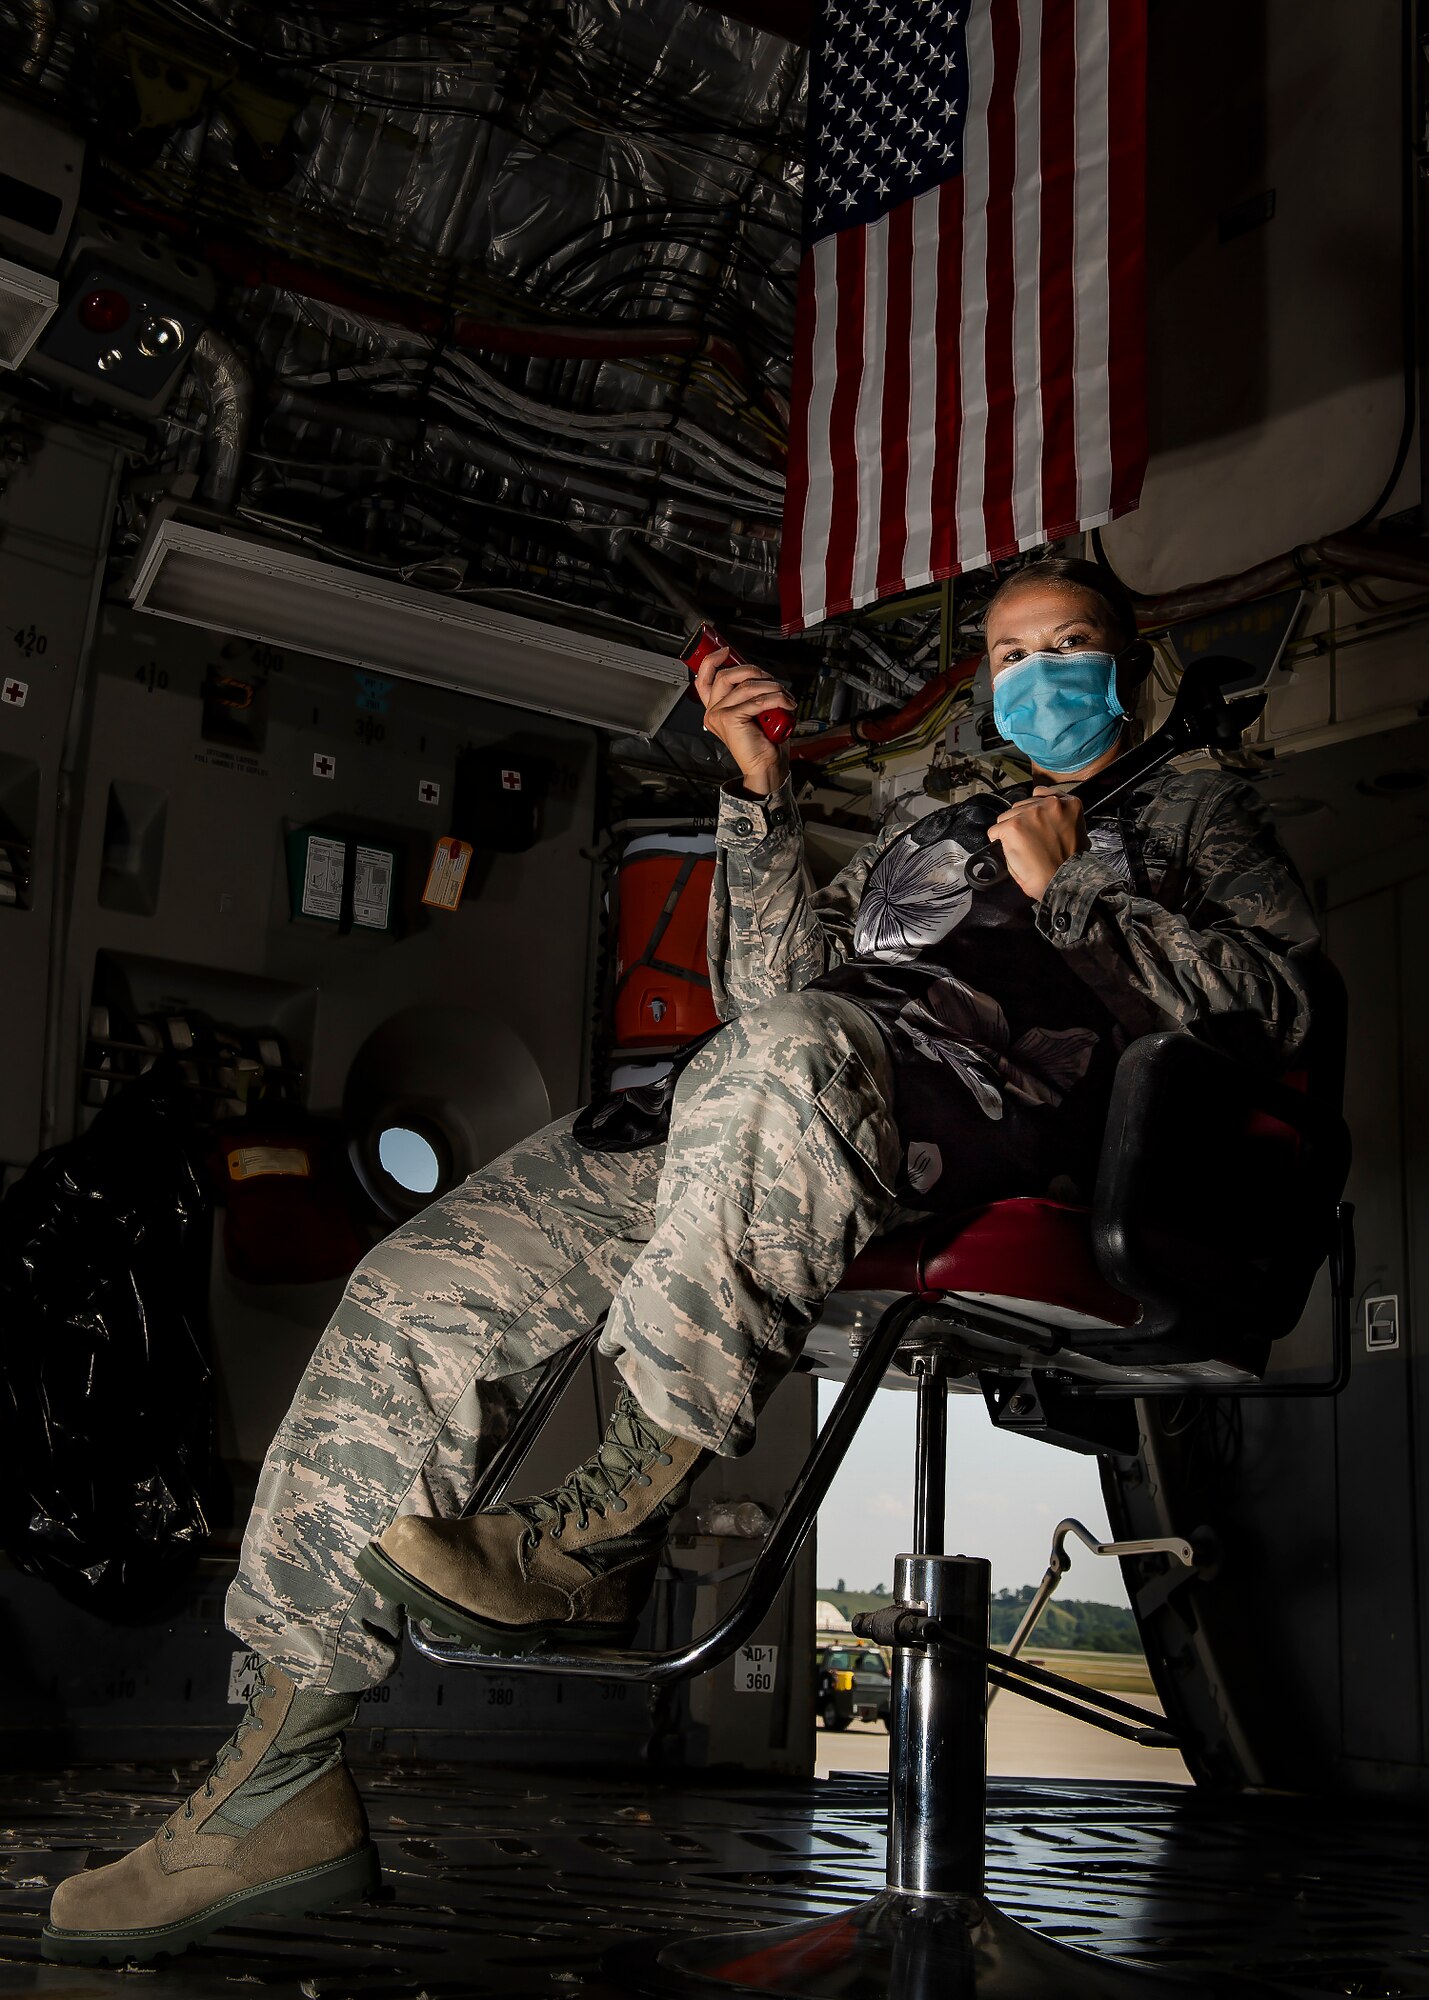 Senior Airman Sara Gutherie, 911th Aircraft Maintenance Squadron integrated flight control systems mechanic, poses for a photo inside a C-17 Globemaster III with a wrench and hair clippers while wearing an apron and personal protective equipment at the Pittsburgh International Airport Air Reserve Station, Pennsylvania, July 8, 2020. During COVID-19 restrictions, Gutherie helped her fellow Airmen by using her skills as a licensed cosmetologist to give them haircuts to ensure they stayed within regulations while taking donations for the Needy Airman Fund in return. (U.S. Air Force photo by Joshua J. Seybert)